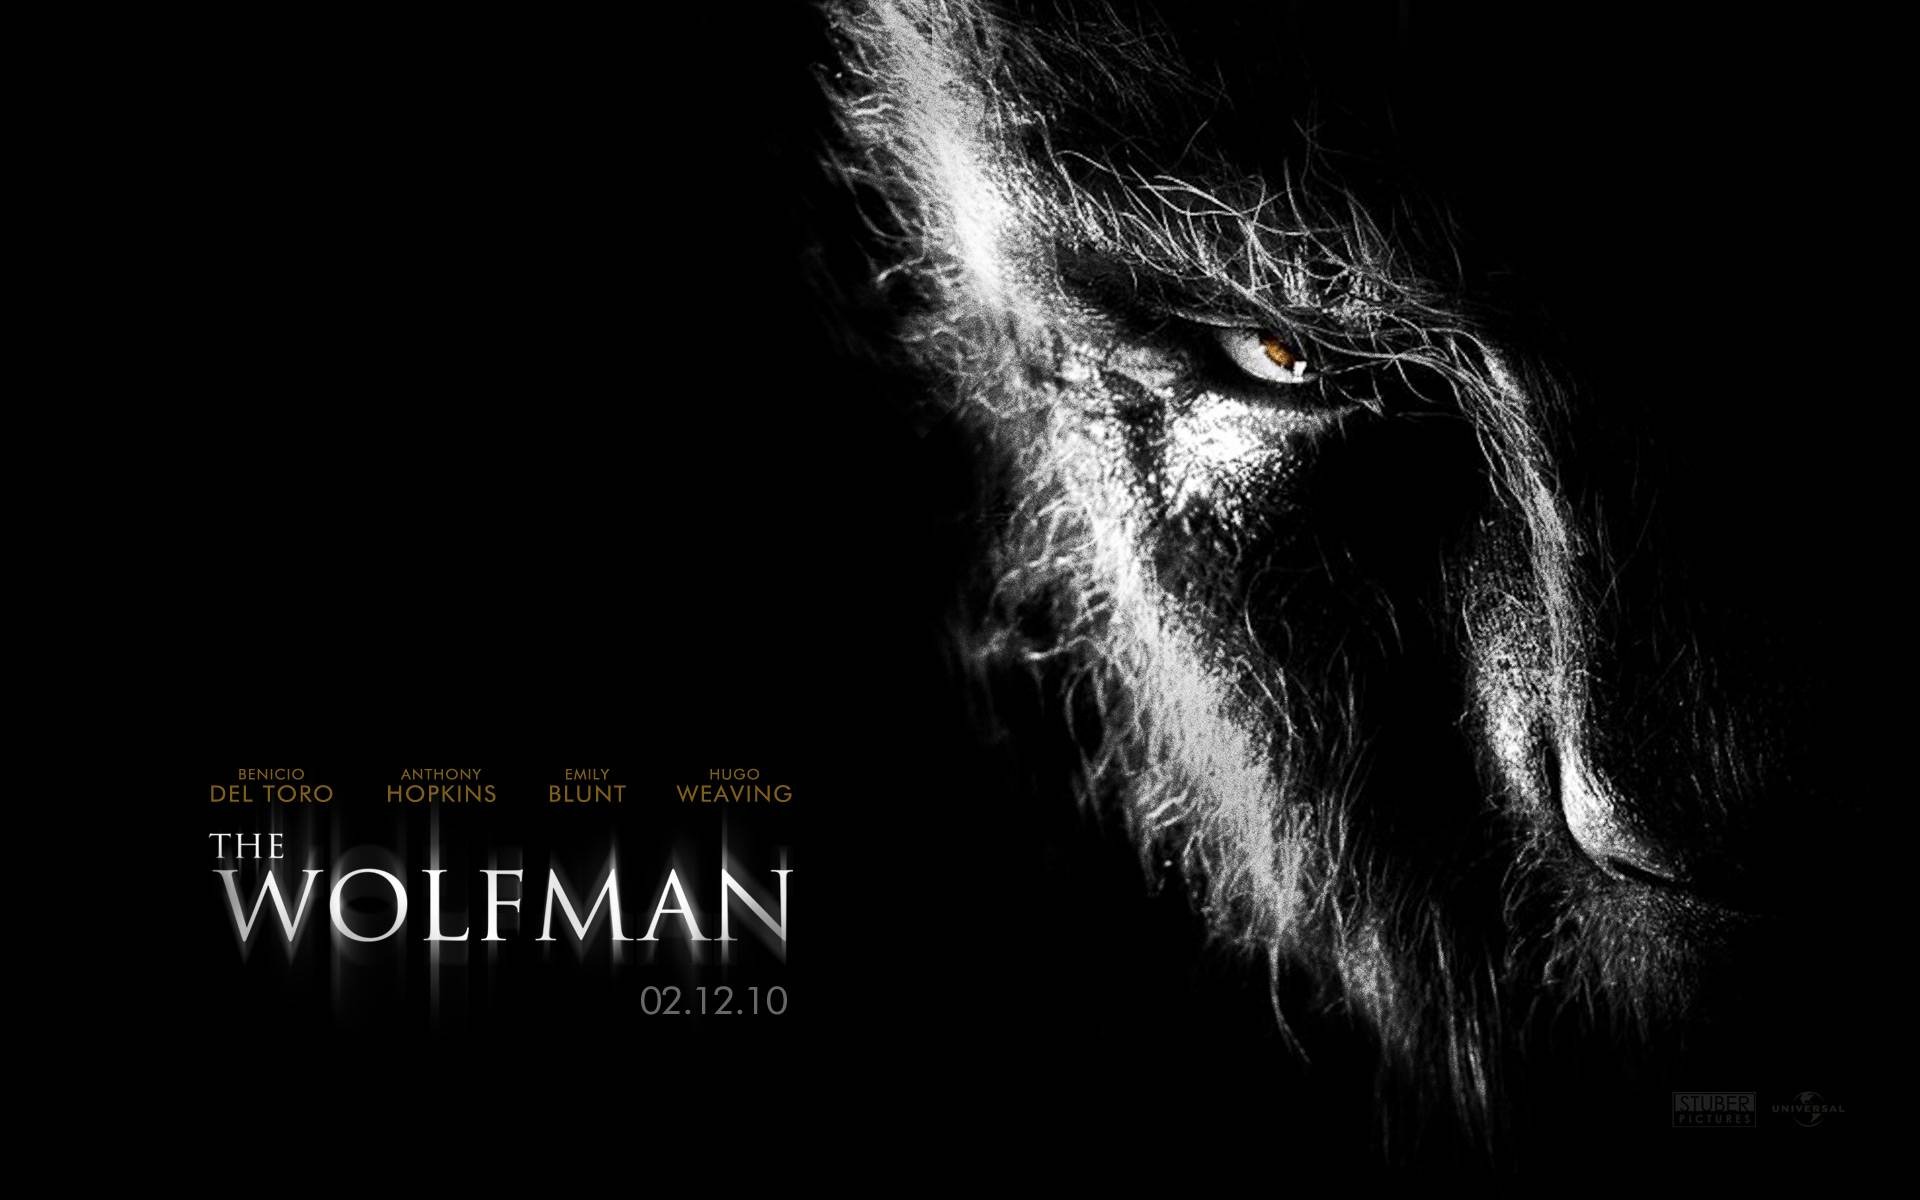 The Wolfman Movie Wallpapers #9 - 1920x1200